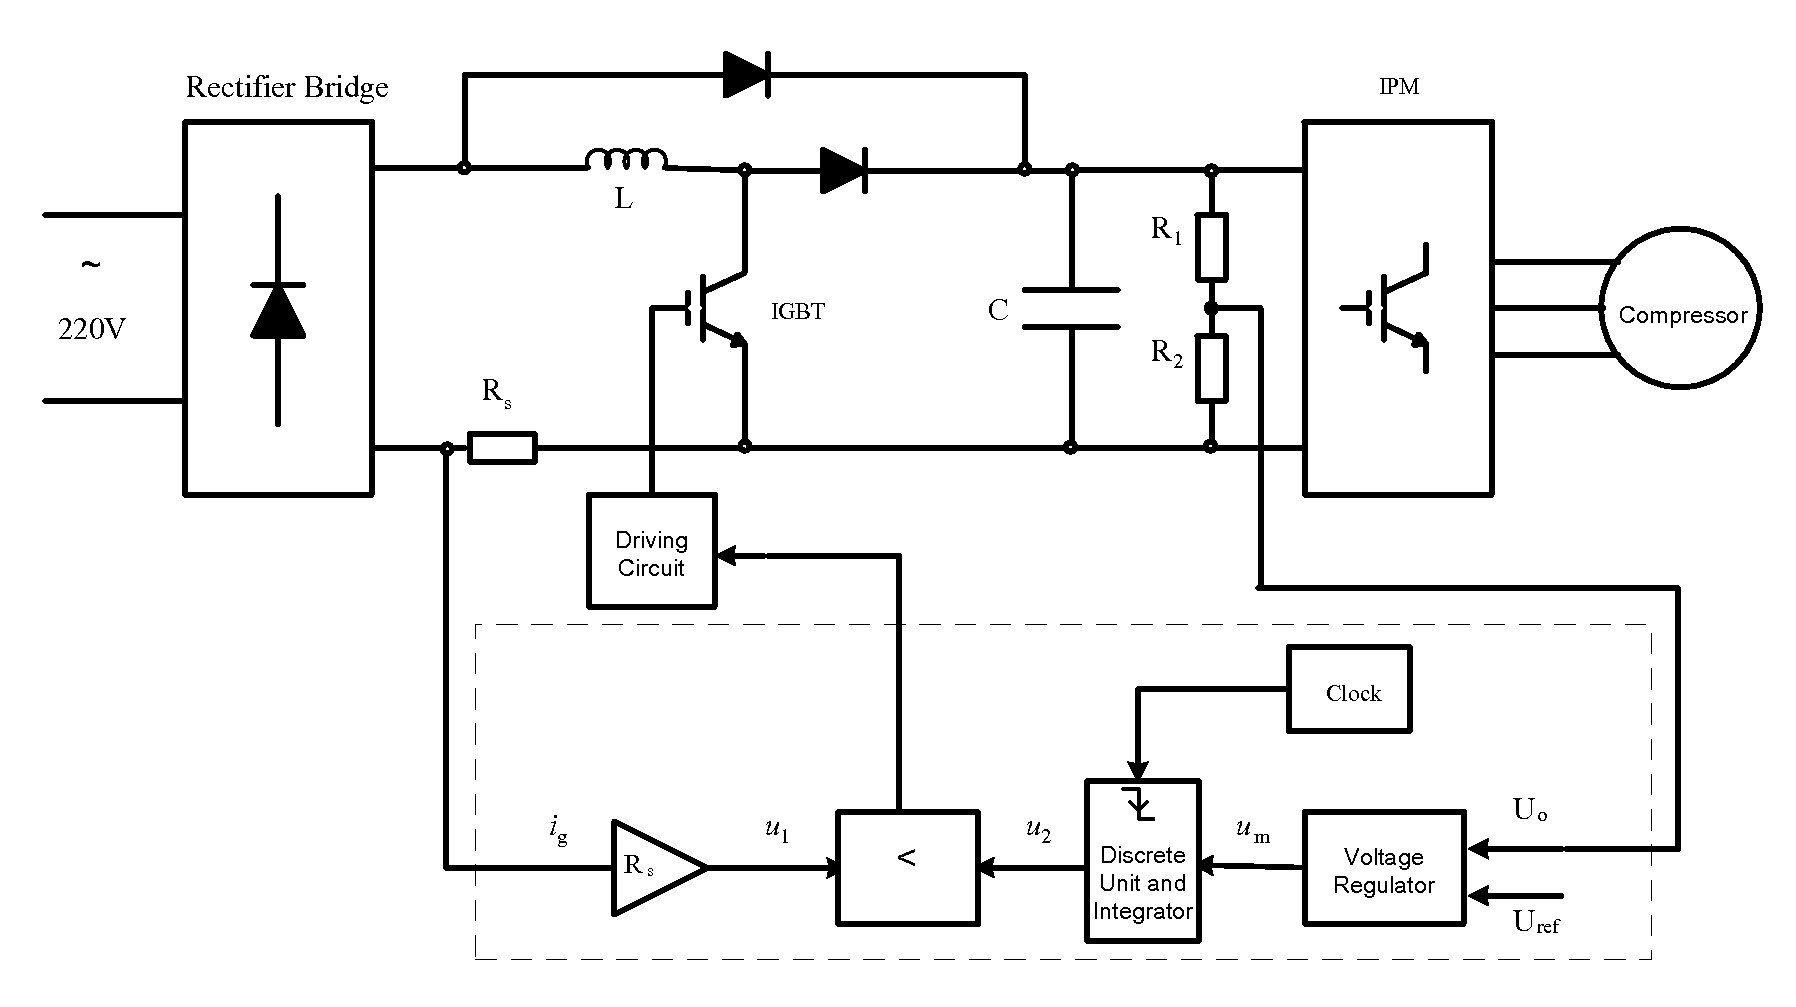 One cycle control method for power factor correction